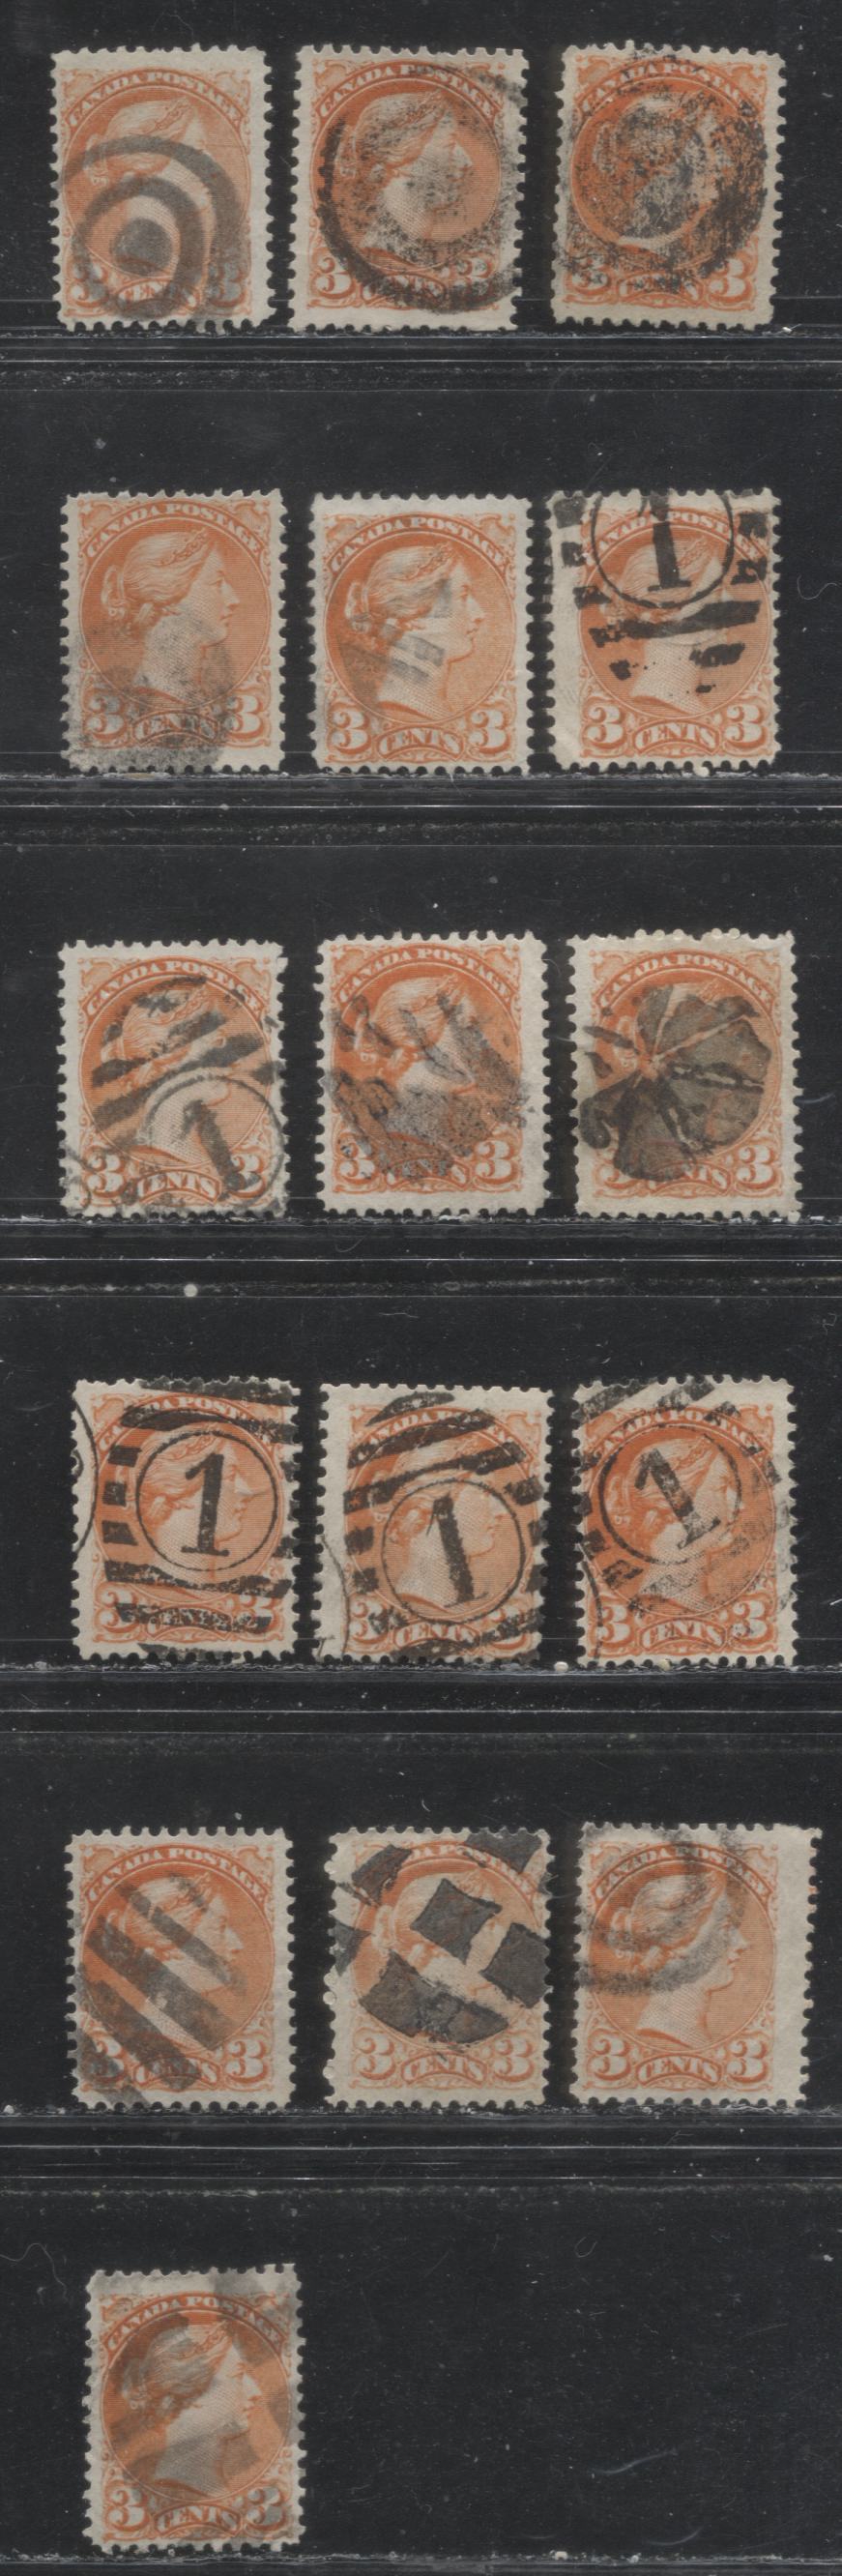 Lot 262 Canada #37 3c Dull Orange Red, Orange Red, Red Orange Queen Victoria, 1870-1897 Small Queen Issue, A Group of Fine Used Examples Montreal, Various Perfs, Vertical Wove, Showing a Range of Shades, Different Cancels